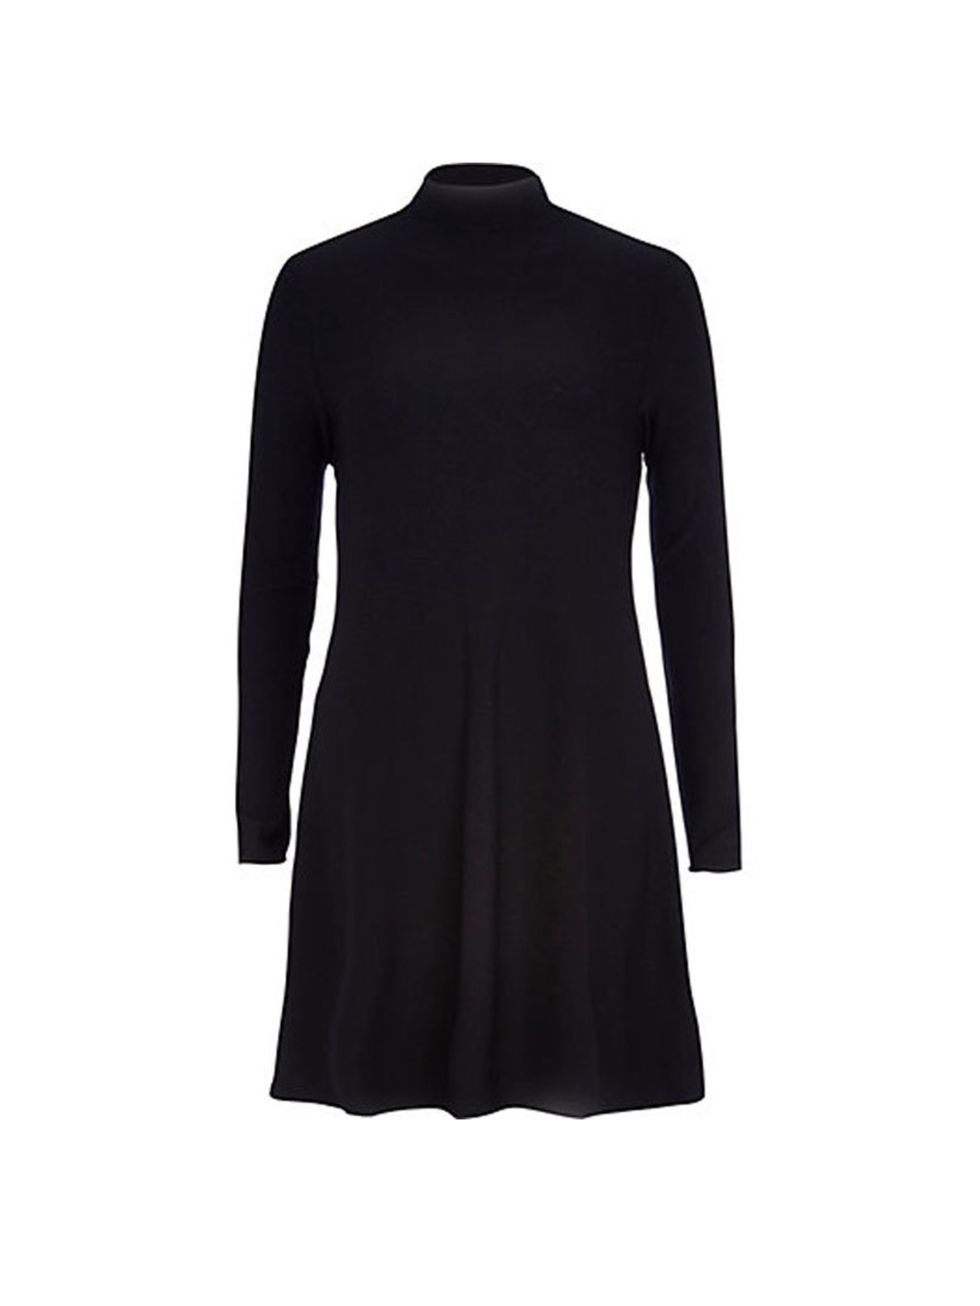 <p>This polo neck dress is the perfect layering piece. <a href="http://riverisland.scene7.com/is/image/RiverIsland/659262_main?$CrossSellProductPage514$">River Island,&nbsp;&pound;28</a>.</p>